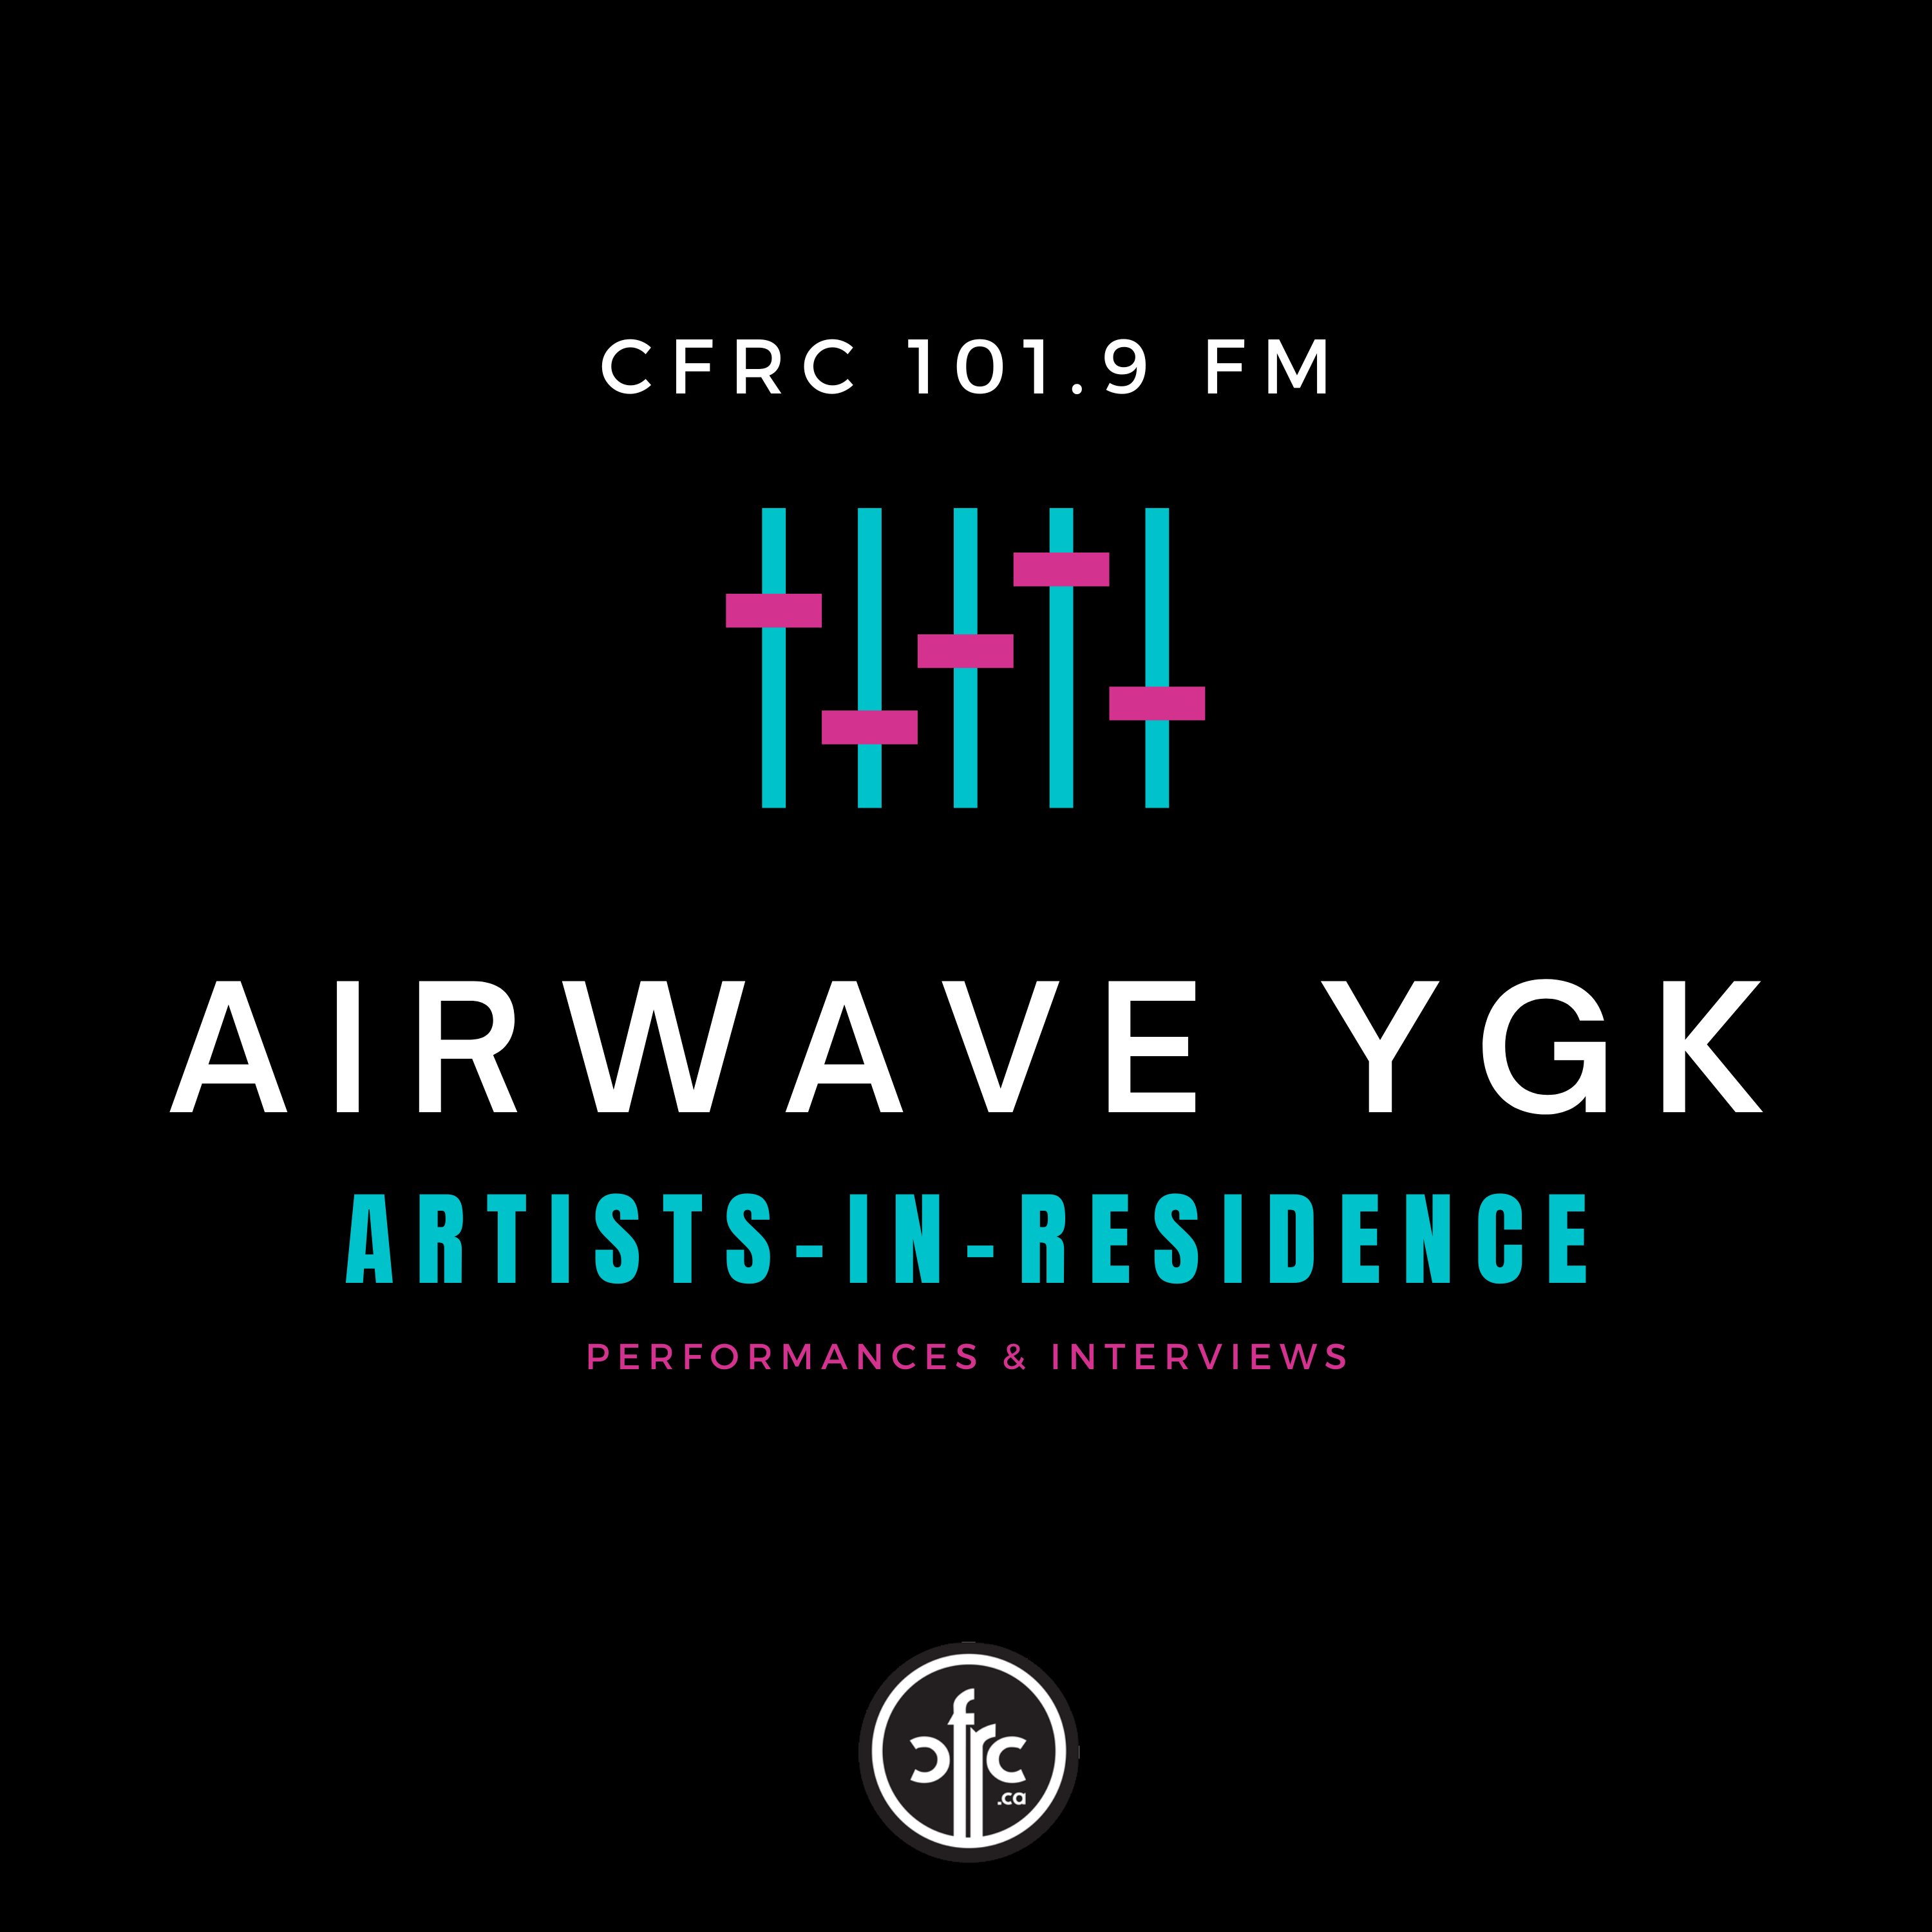 Airwave YGK Artists in Residence - CFRC Podcast Network